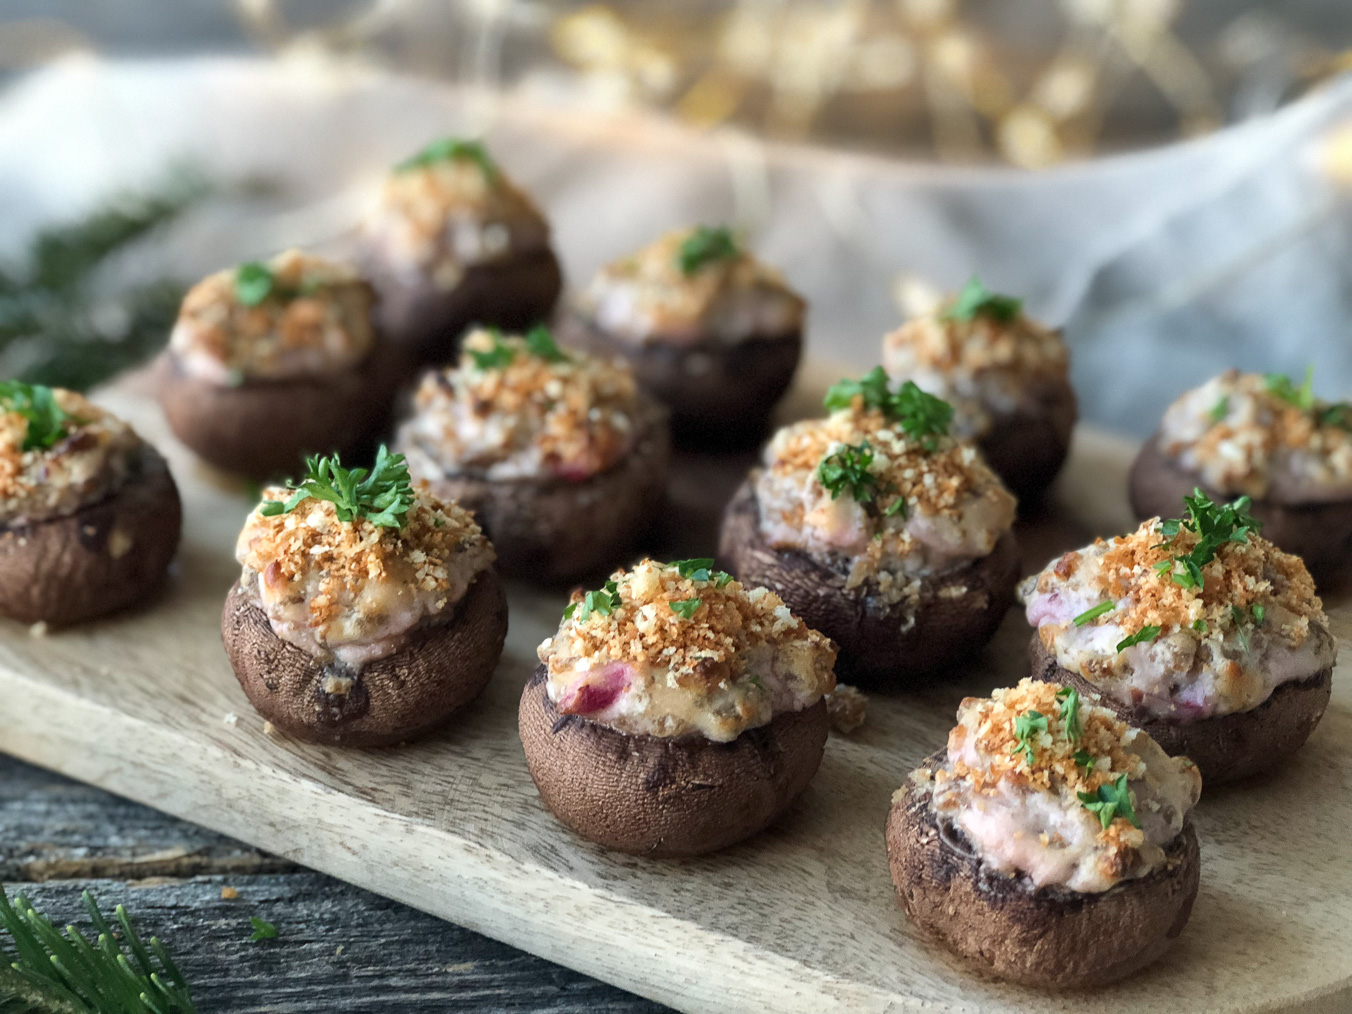 Can We Guess Your Age by Your Taste in Appetizers? stuffed mushrooms2